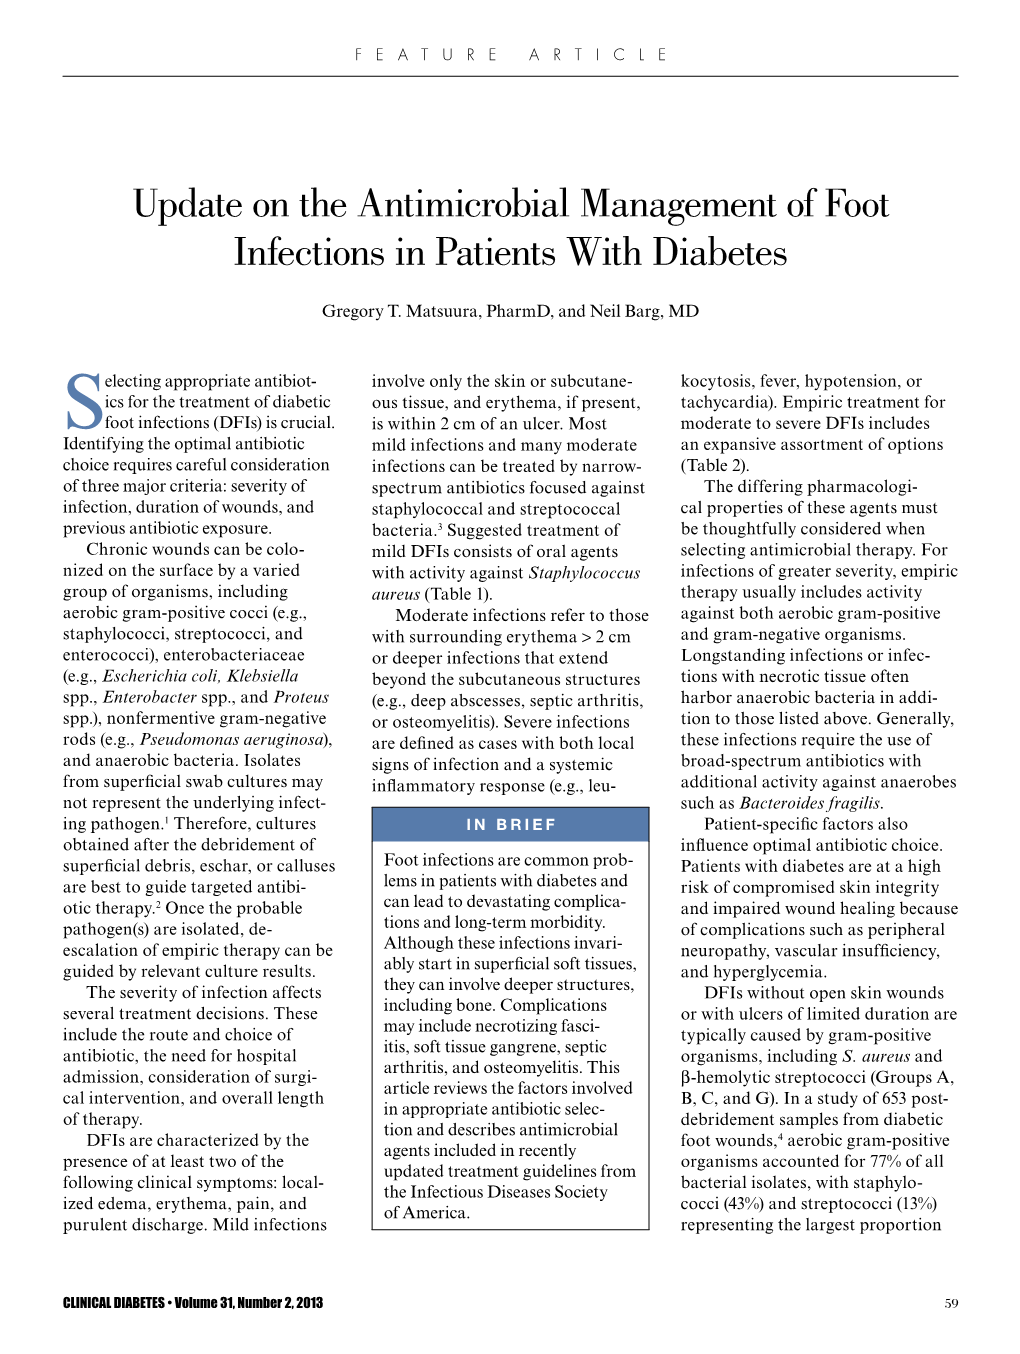 Update on the Antimicrobial Management of Foot Infections in Patients with Diabetes